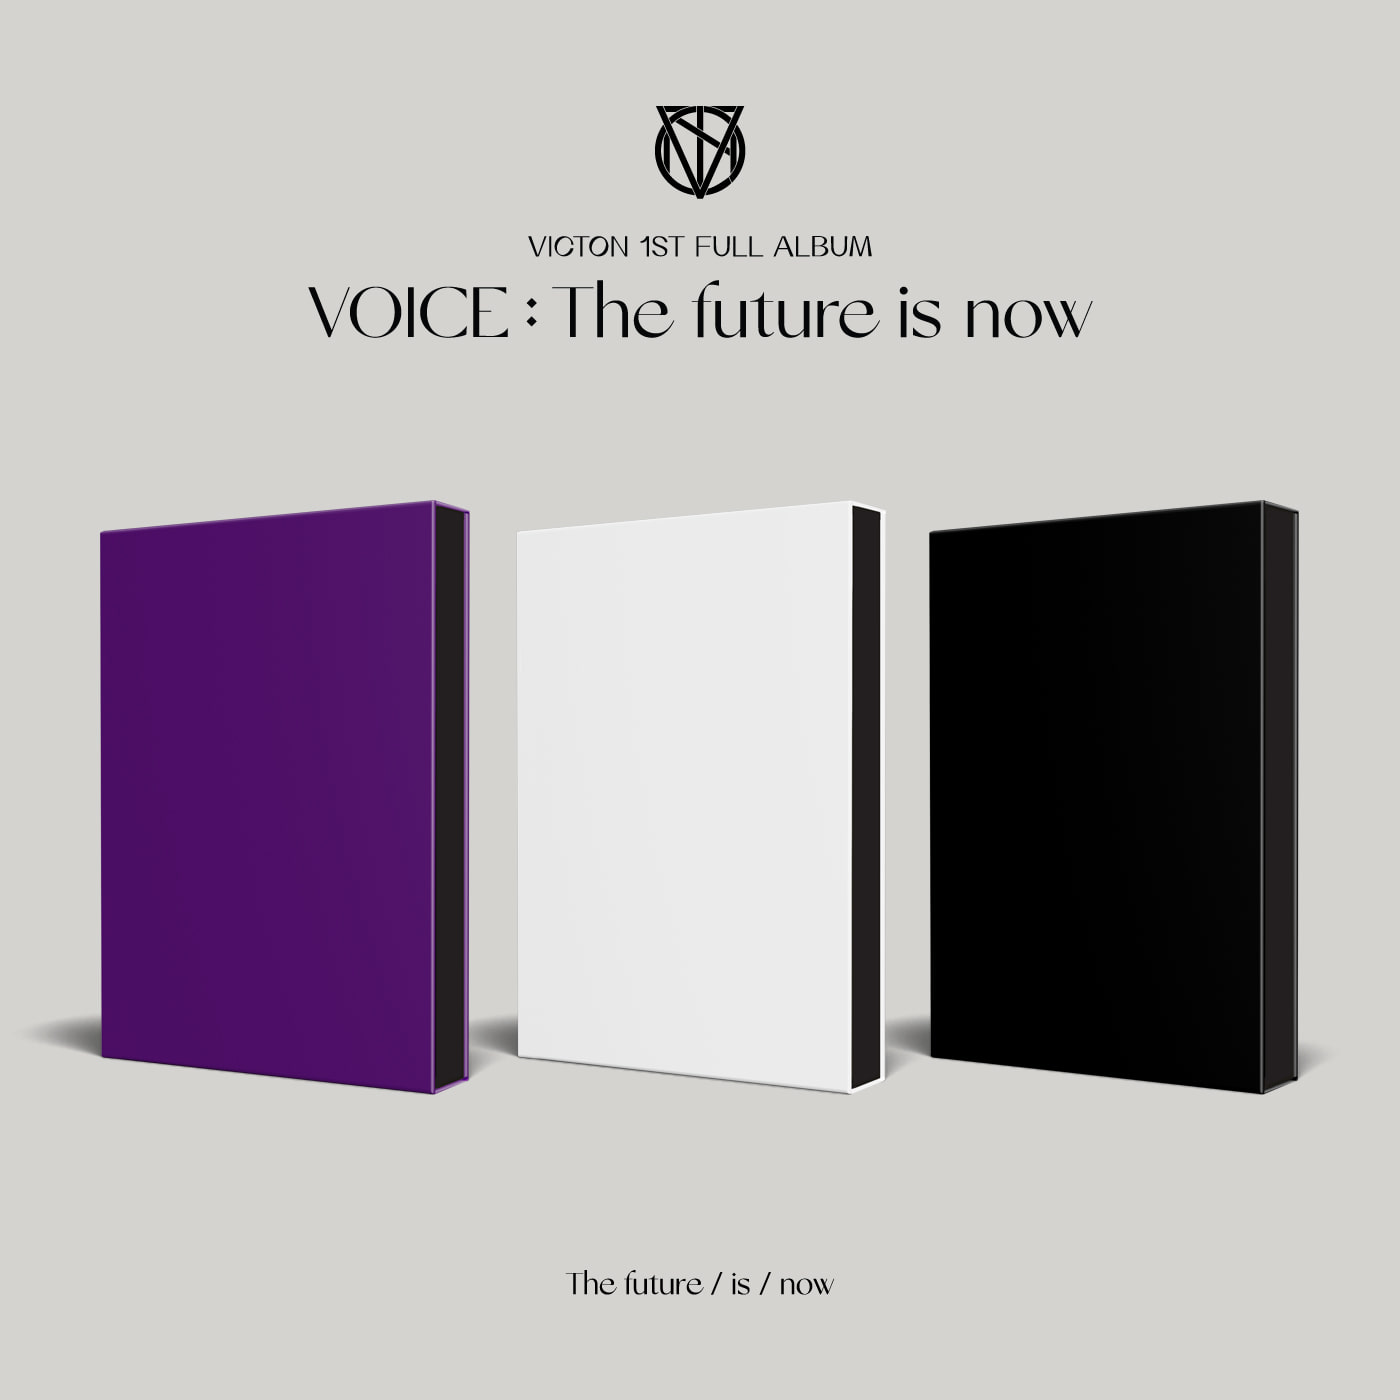 VICTON - Album Vol.1 [VOICE : The future is now] (The future ver.+ now ver.+is ver.)(3CD SET)케이팝스토어(kpop store)